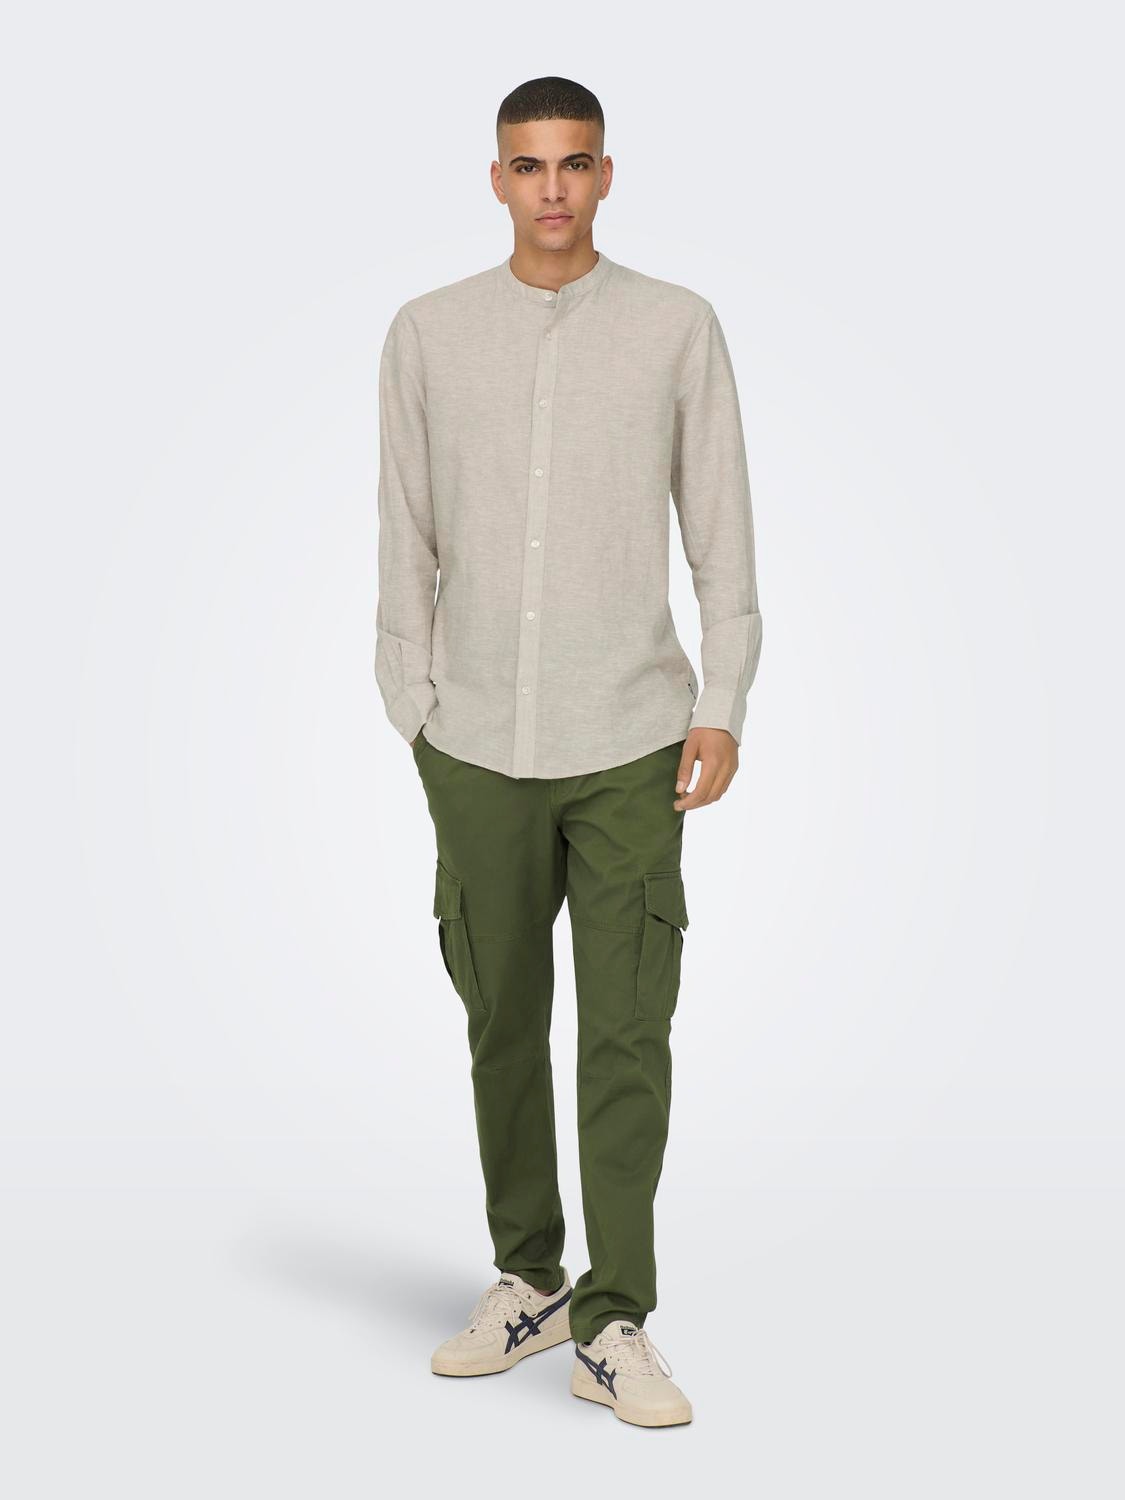 ONLY & SONS ONSDEAN LIFE TAP CARGO 0032 PANT NOOS -Olive Night - 22025431